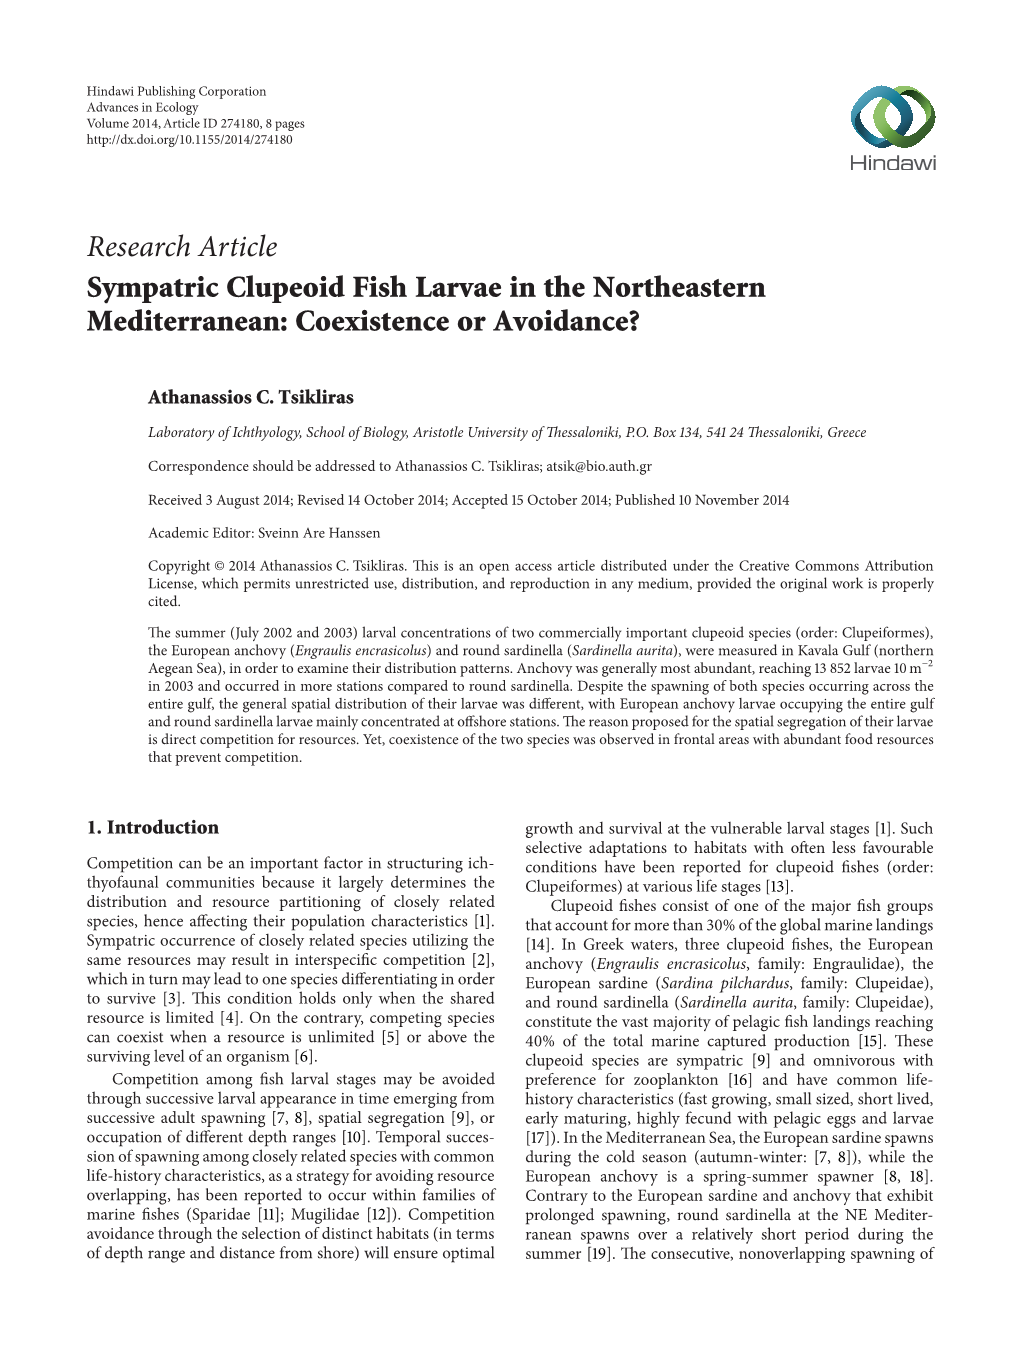 Sympatric Clupeoid Fish Larvae in the Northeastern Mediterranean: Coexistence Or Avoidance?